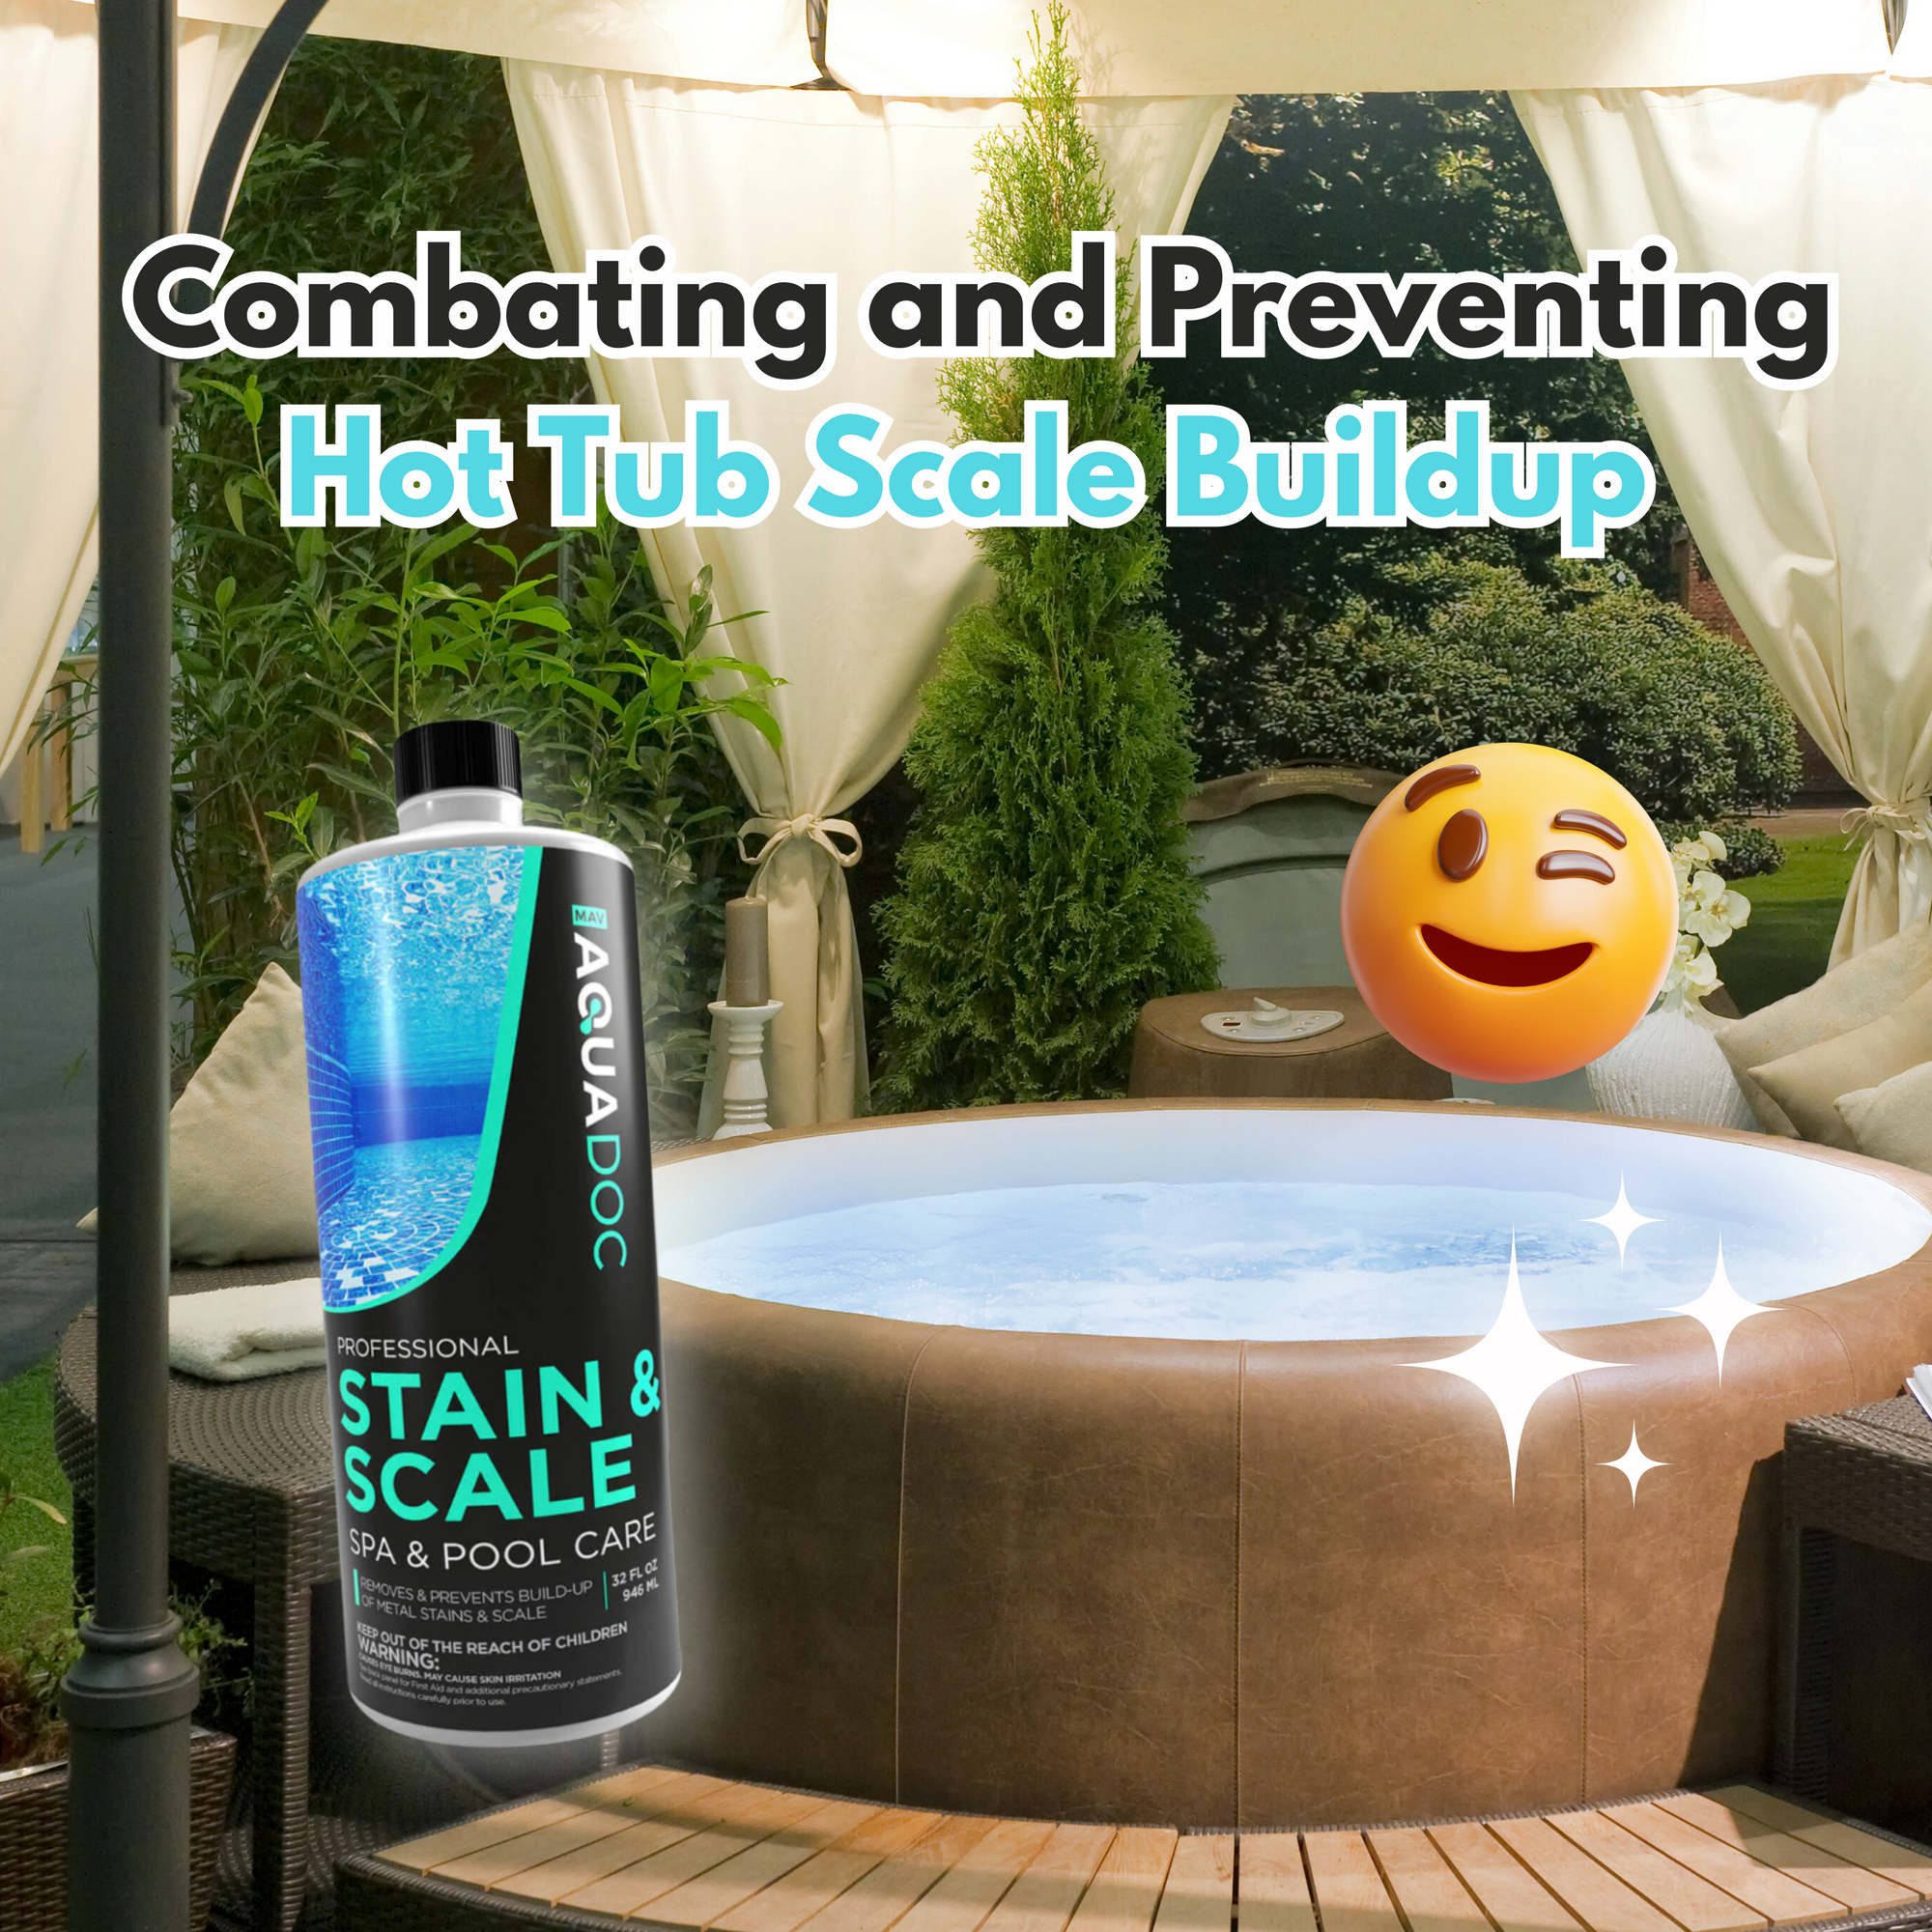 Transform your hot tub! Before and after comparison of scaly mess to crystal-clear oasis thanks to effective scale removal techniques